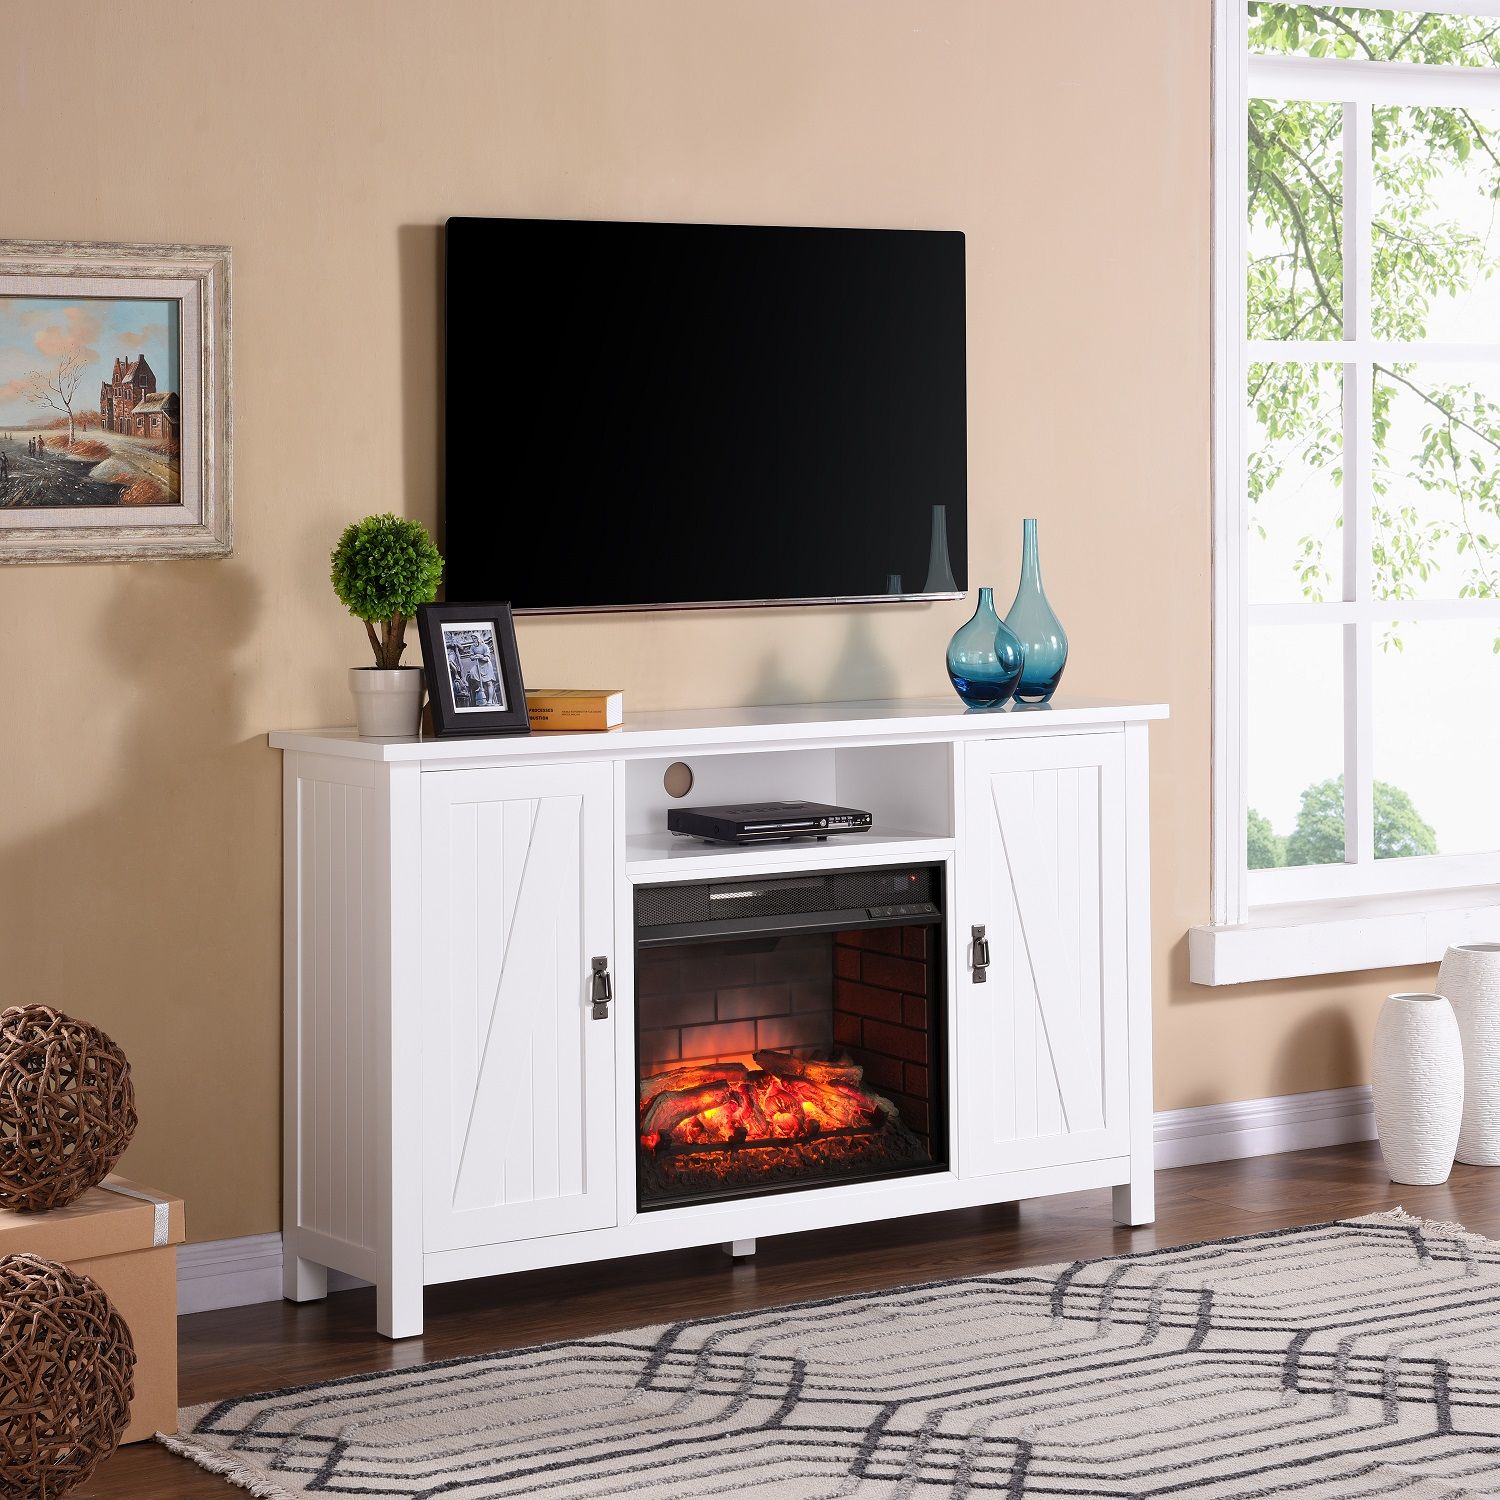 58" Adderly Farmhouse Style Infrared Electric Fireplace Tv Stand – White With Regard To Tv Stands With Electric Fireplace (View 19 of 20)